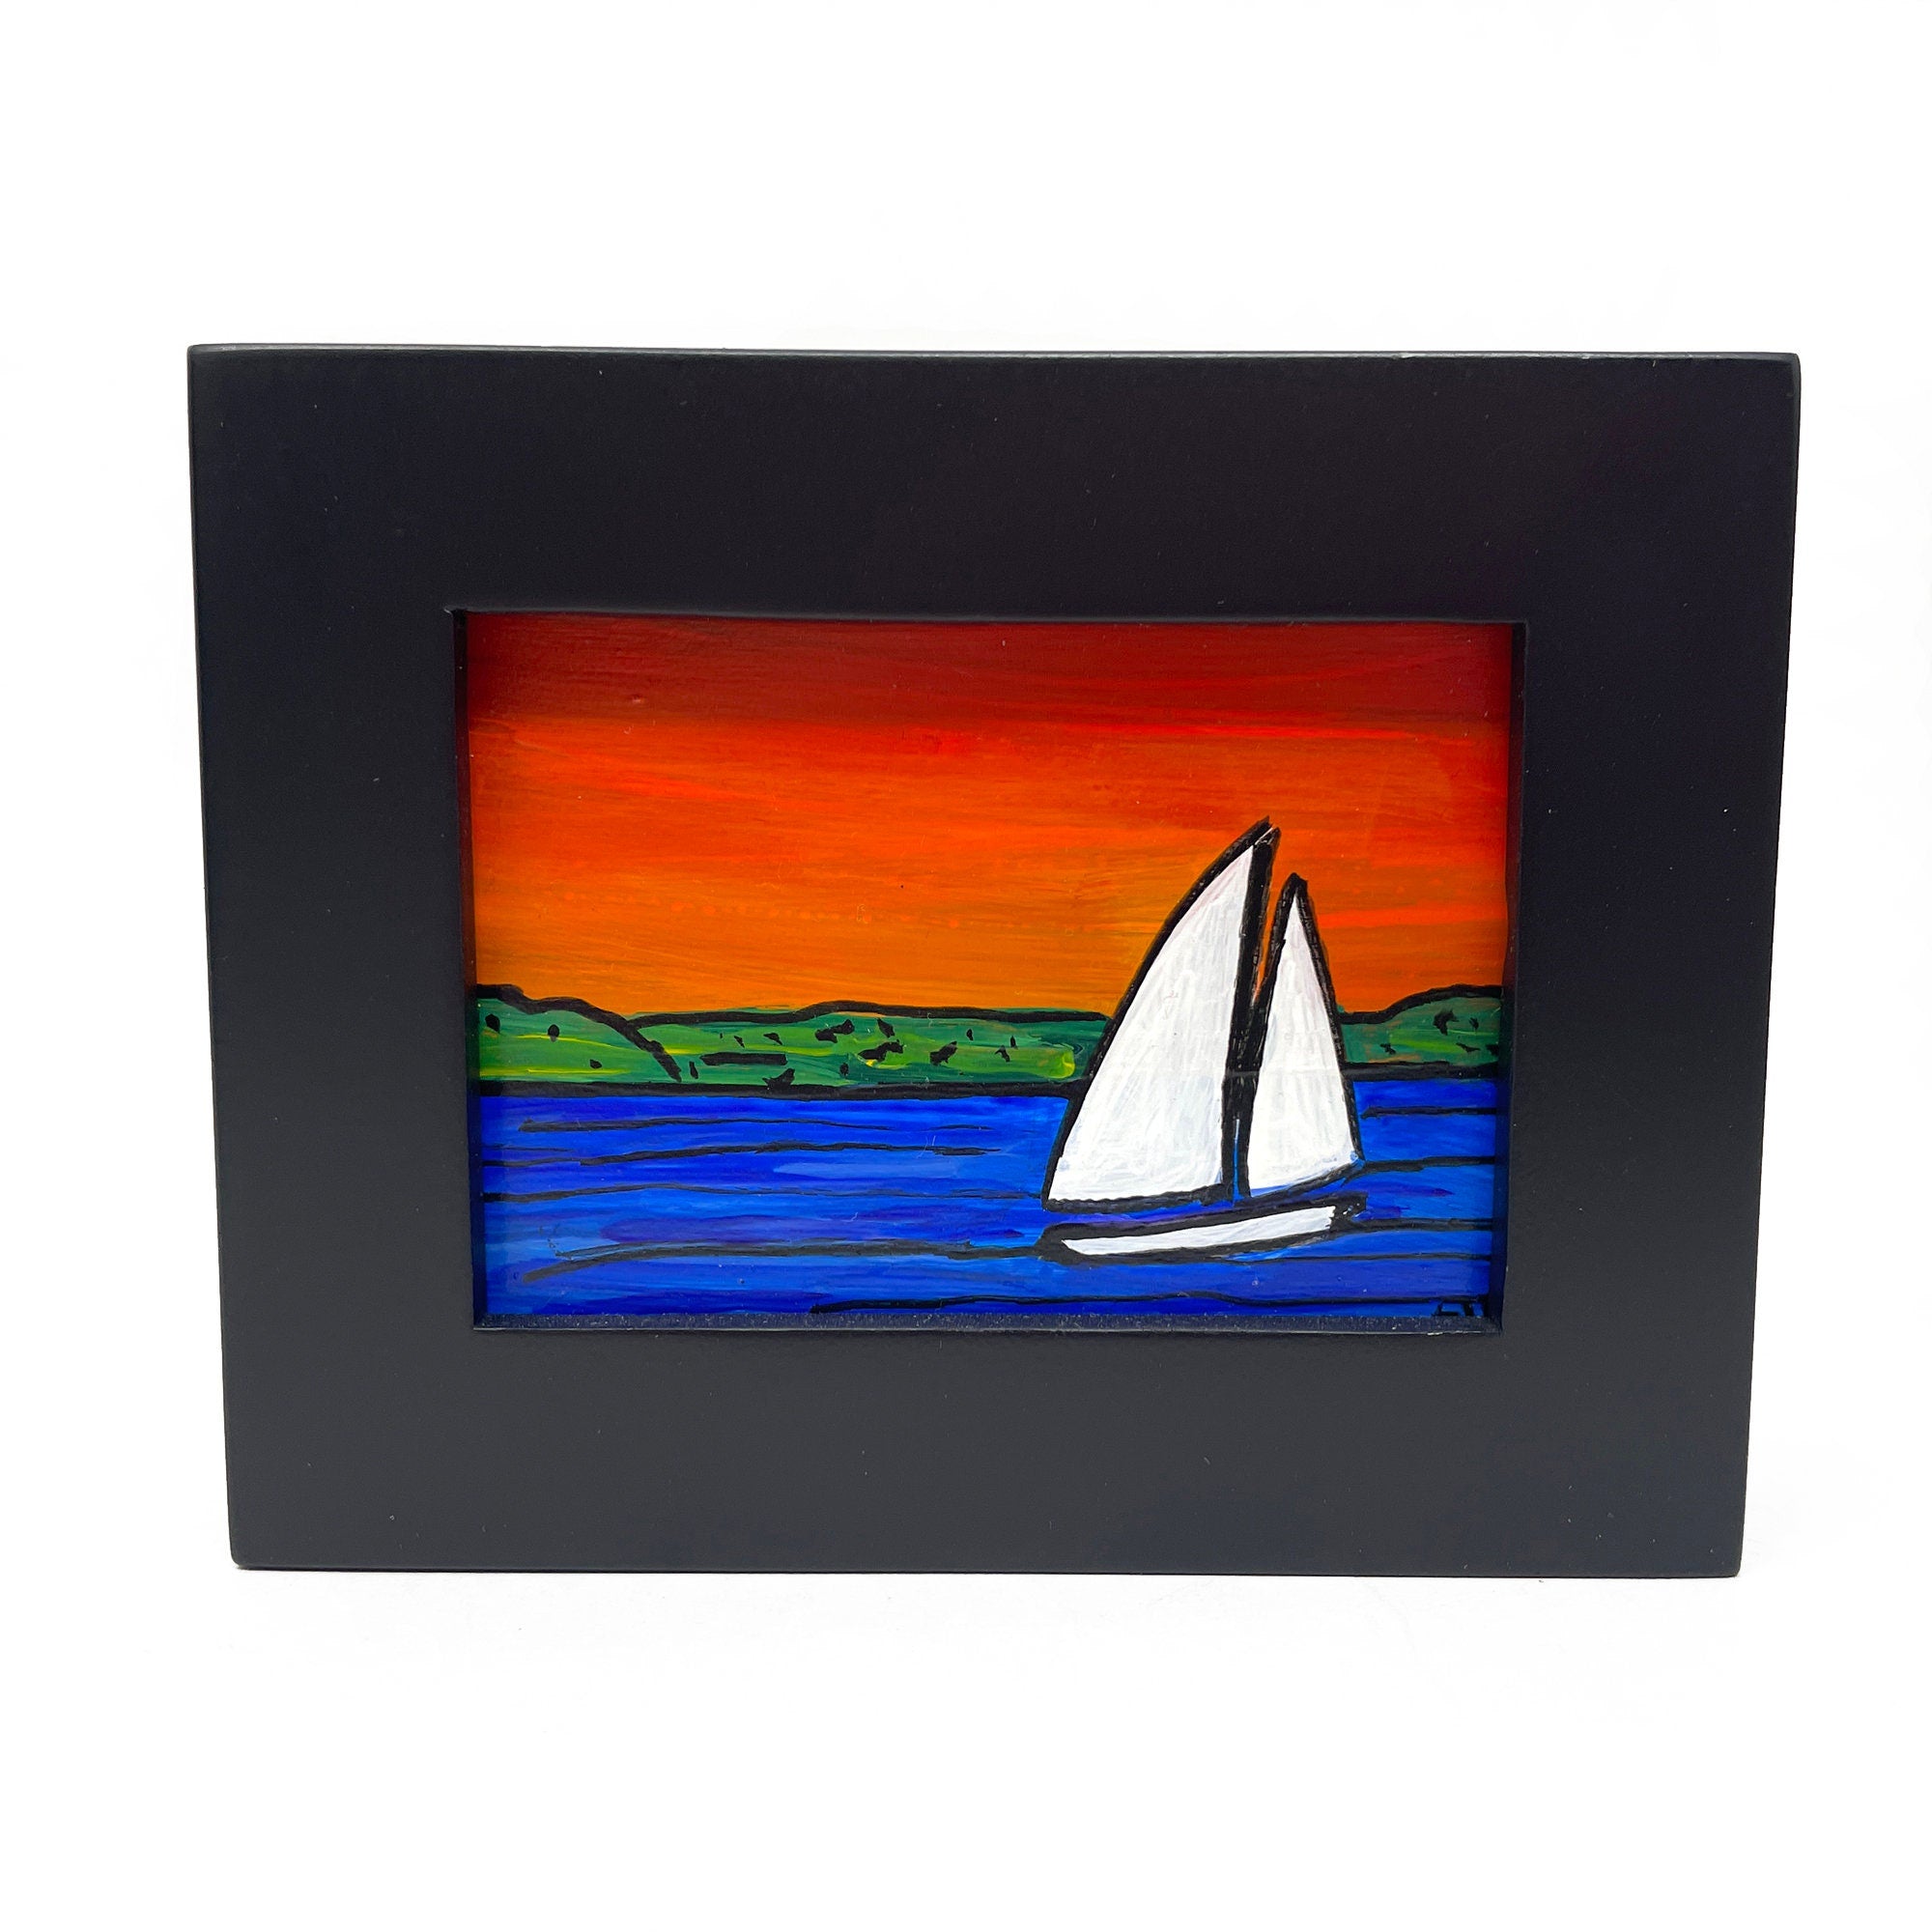 Small Bay Sunset Painting - Framed Sailboat Art - Bayscape, Seascape, Nautical Decor for Wall, Desk, or Bookshelf